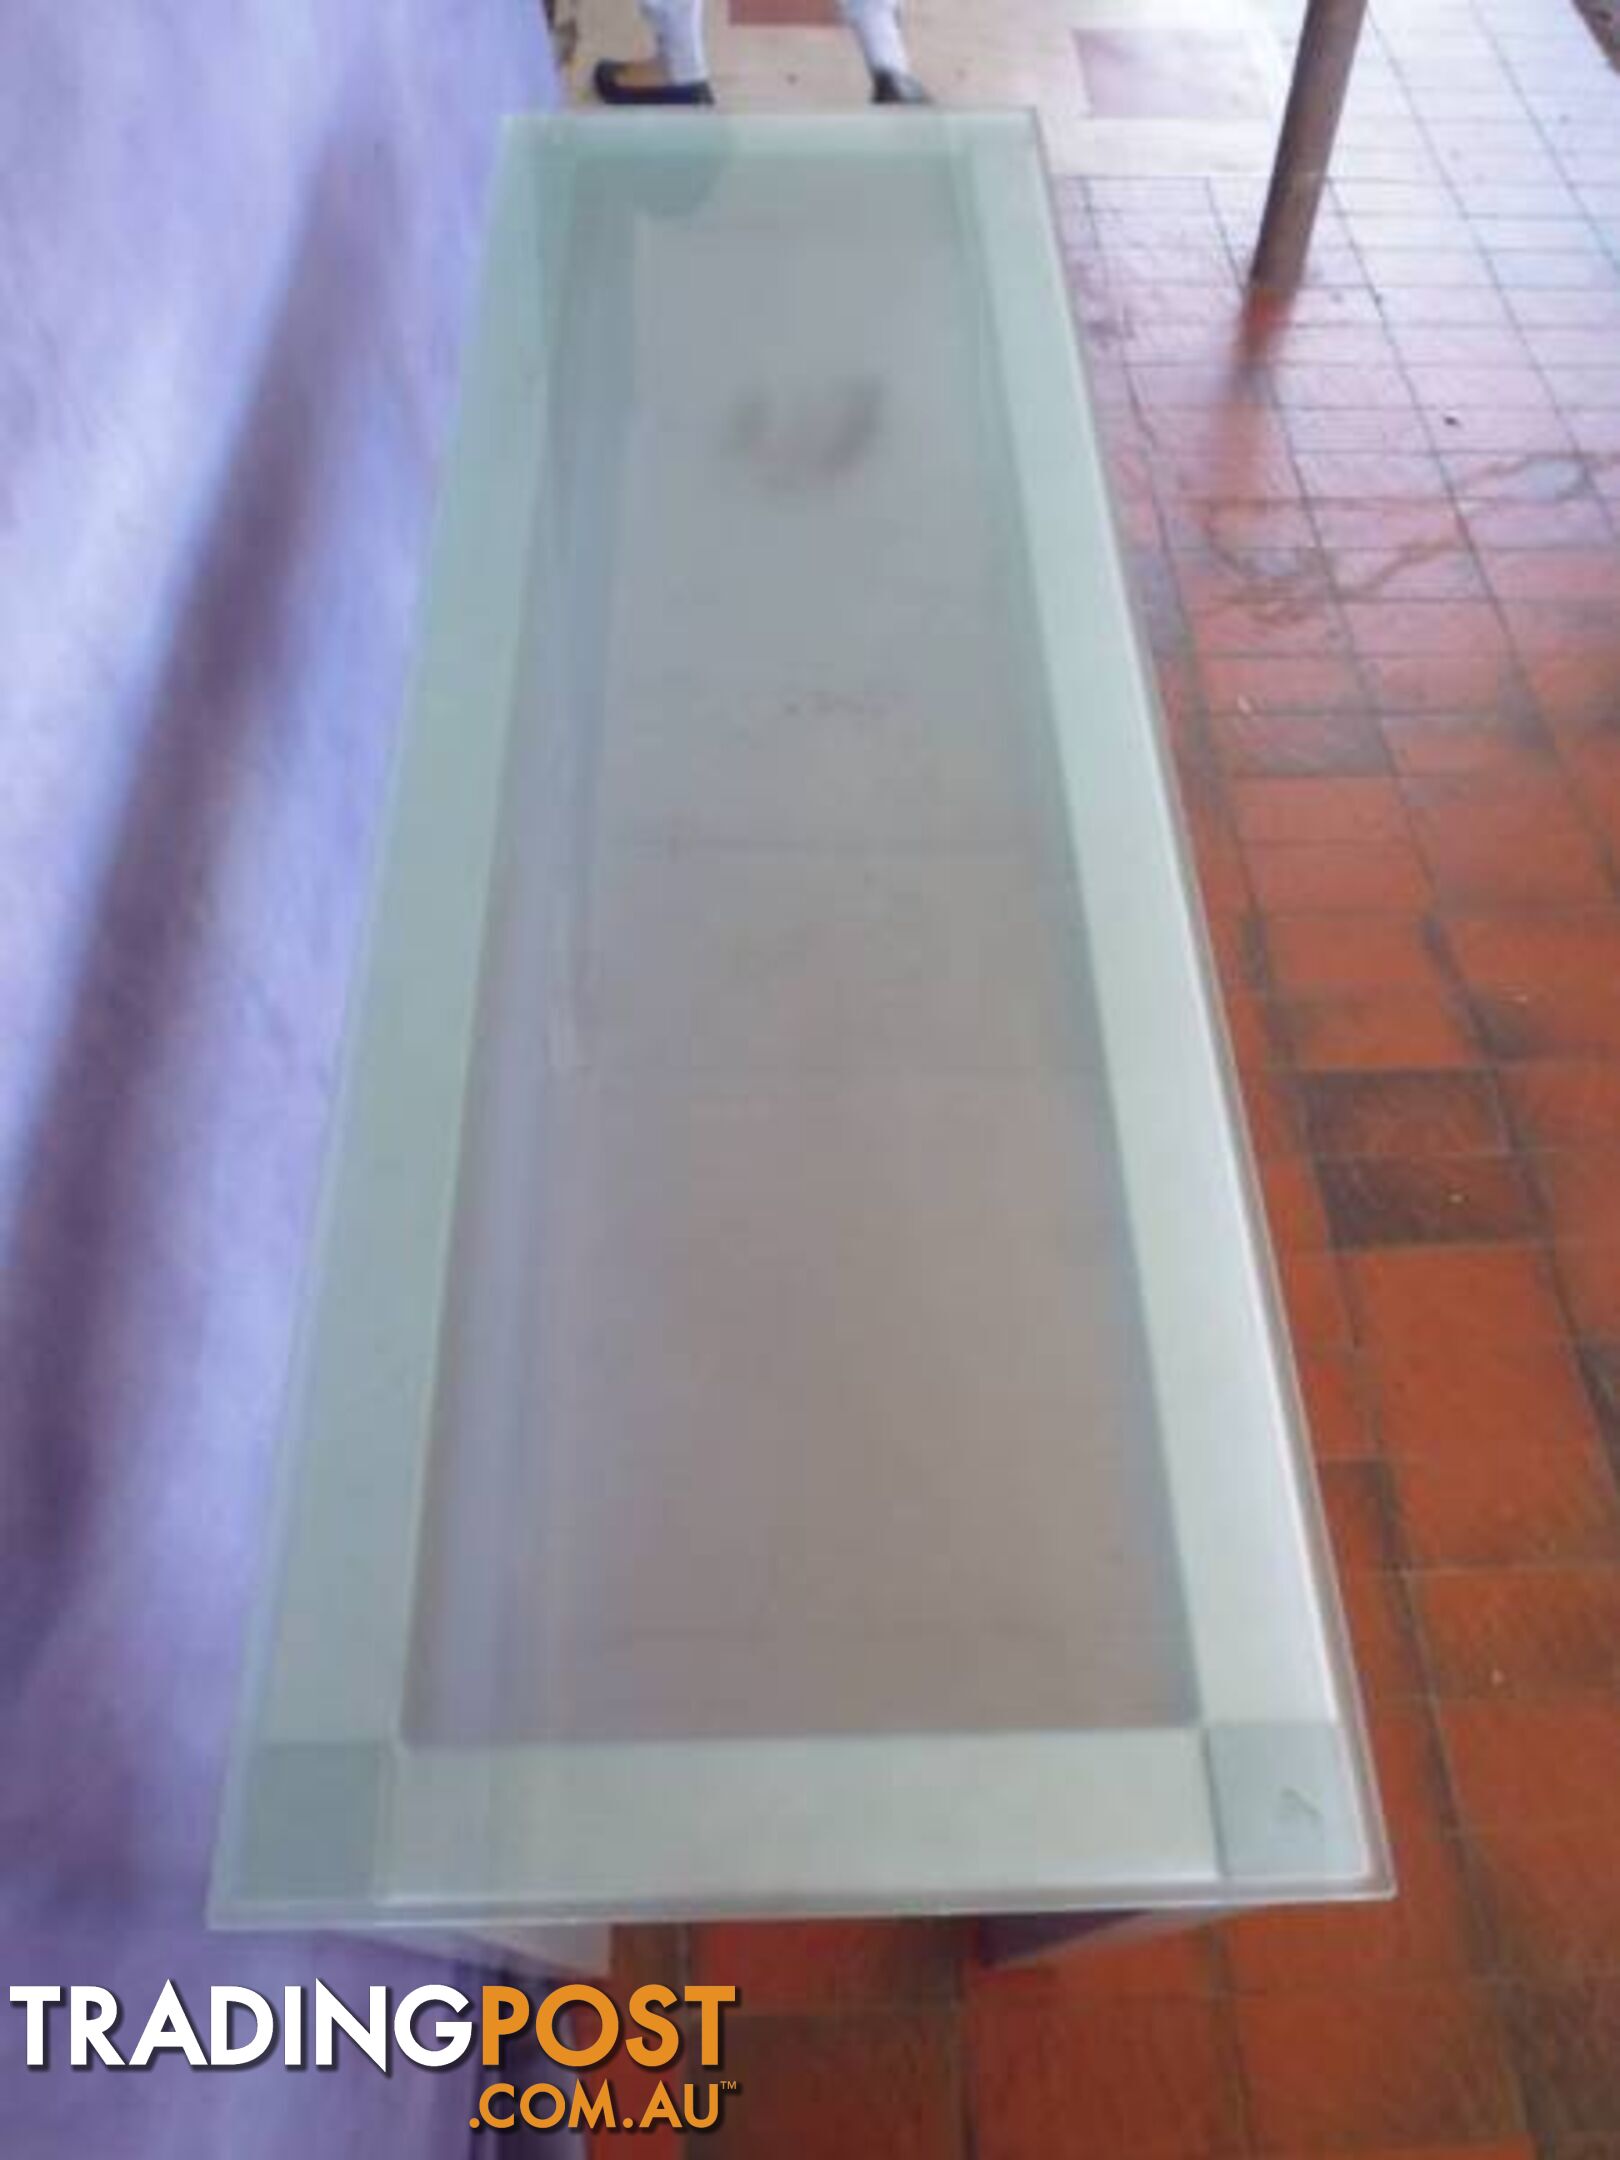 Hall Table / Console, Glass Top, 365581